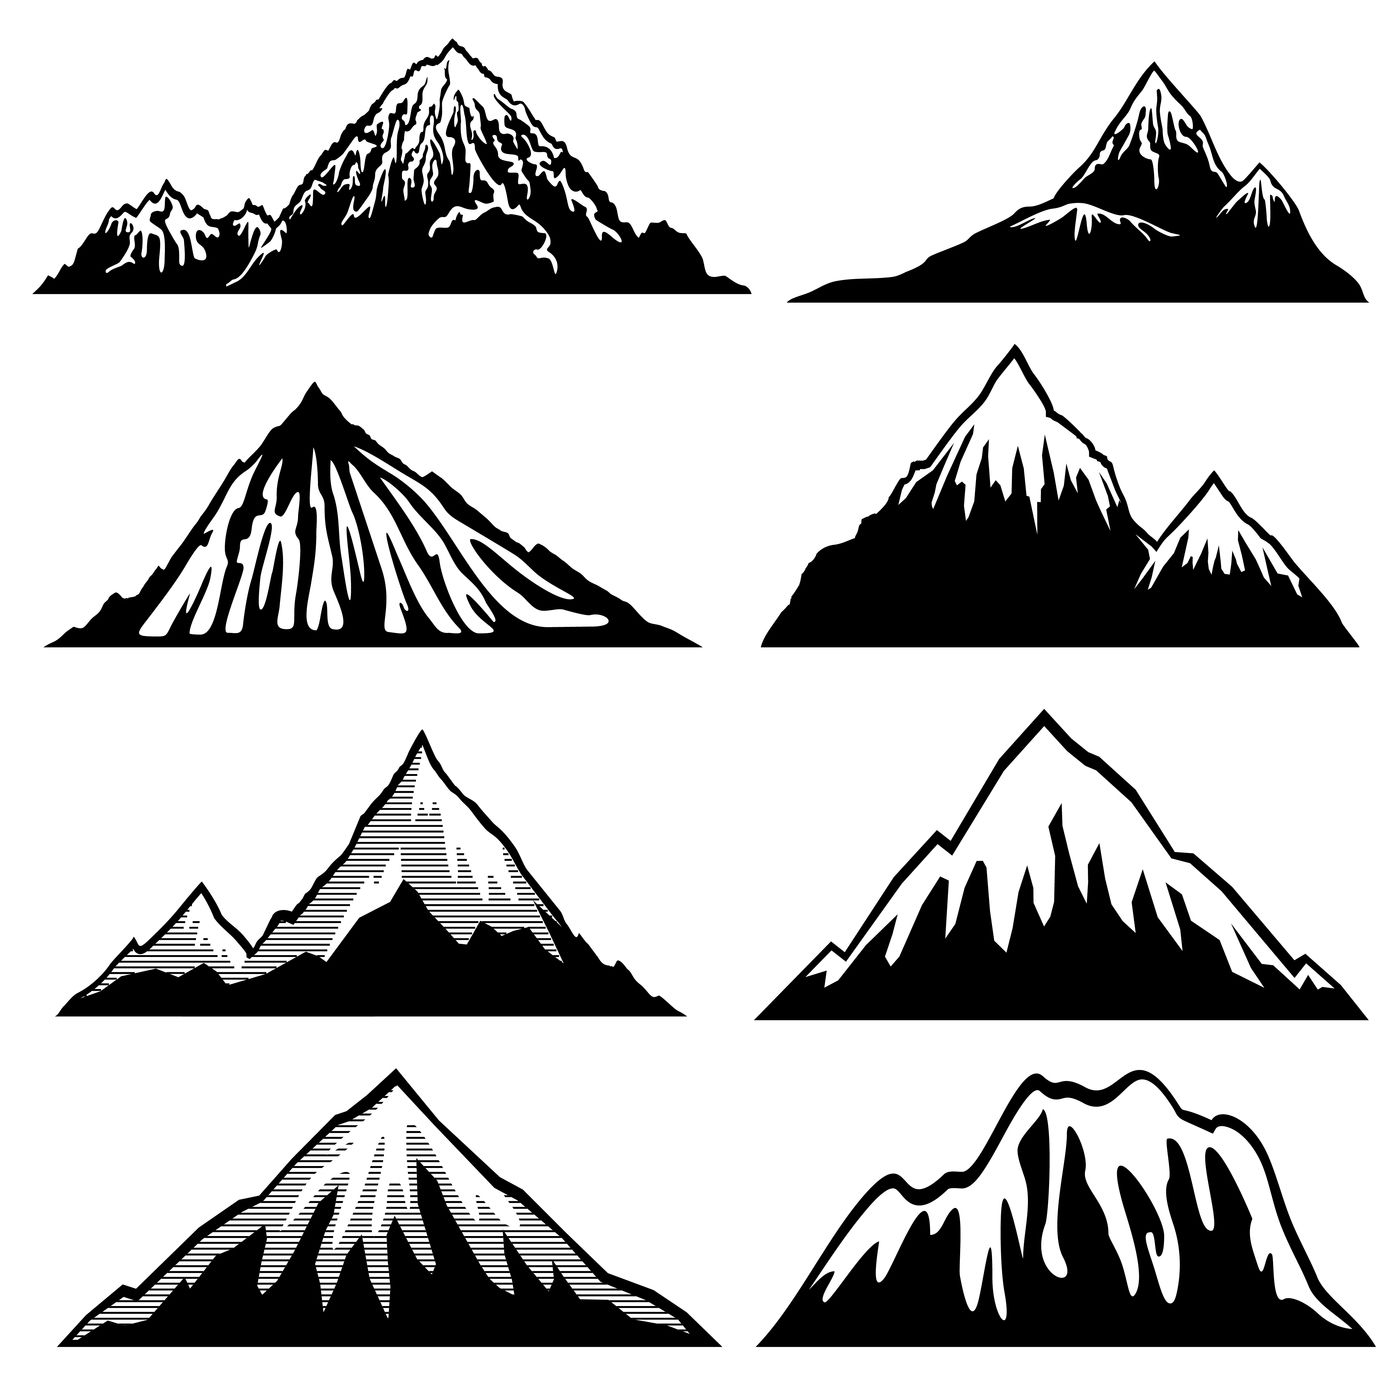 Highlands, mountains vector silhouettes with snow capped peaks and hil ...